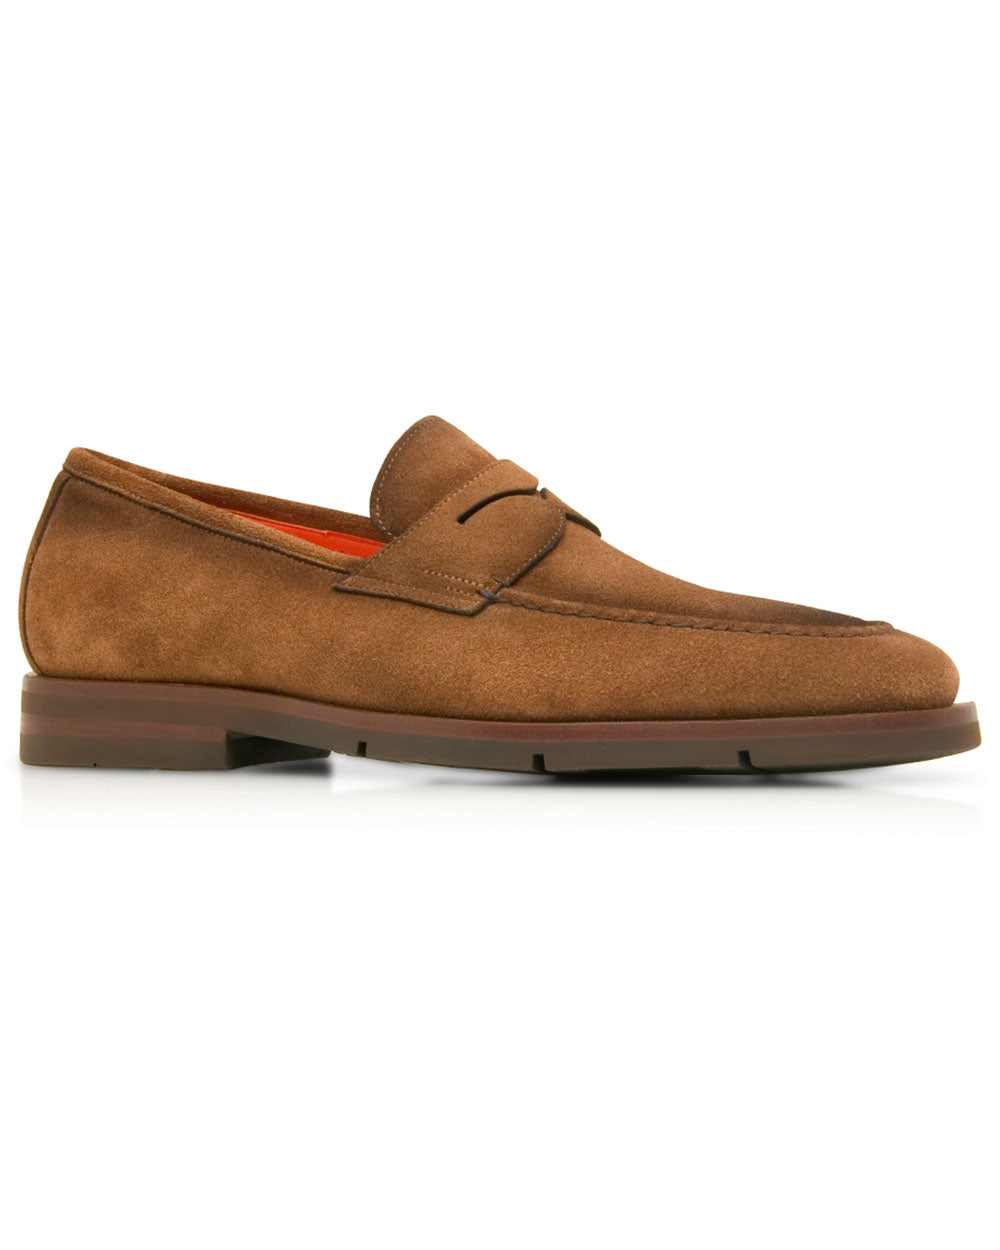 Suede Penny Loafer in Brown